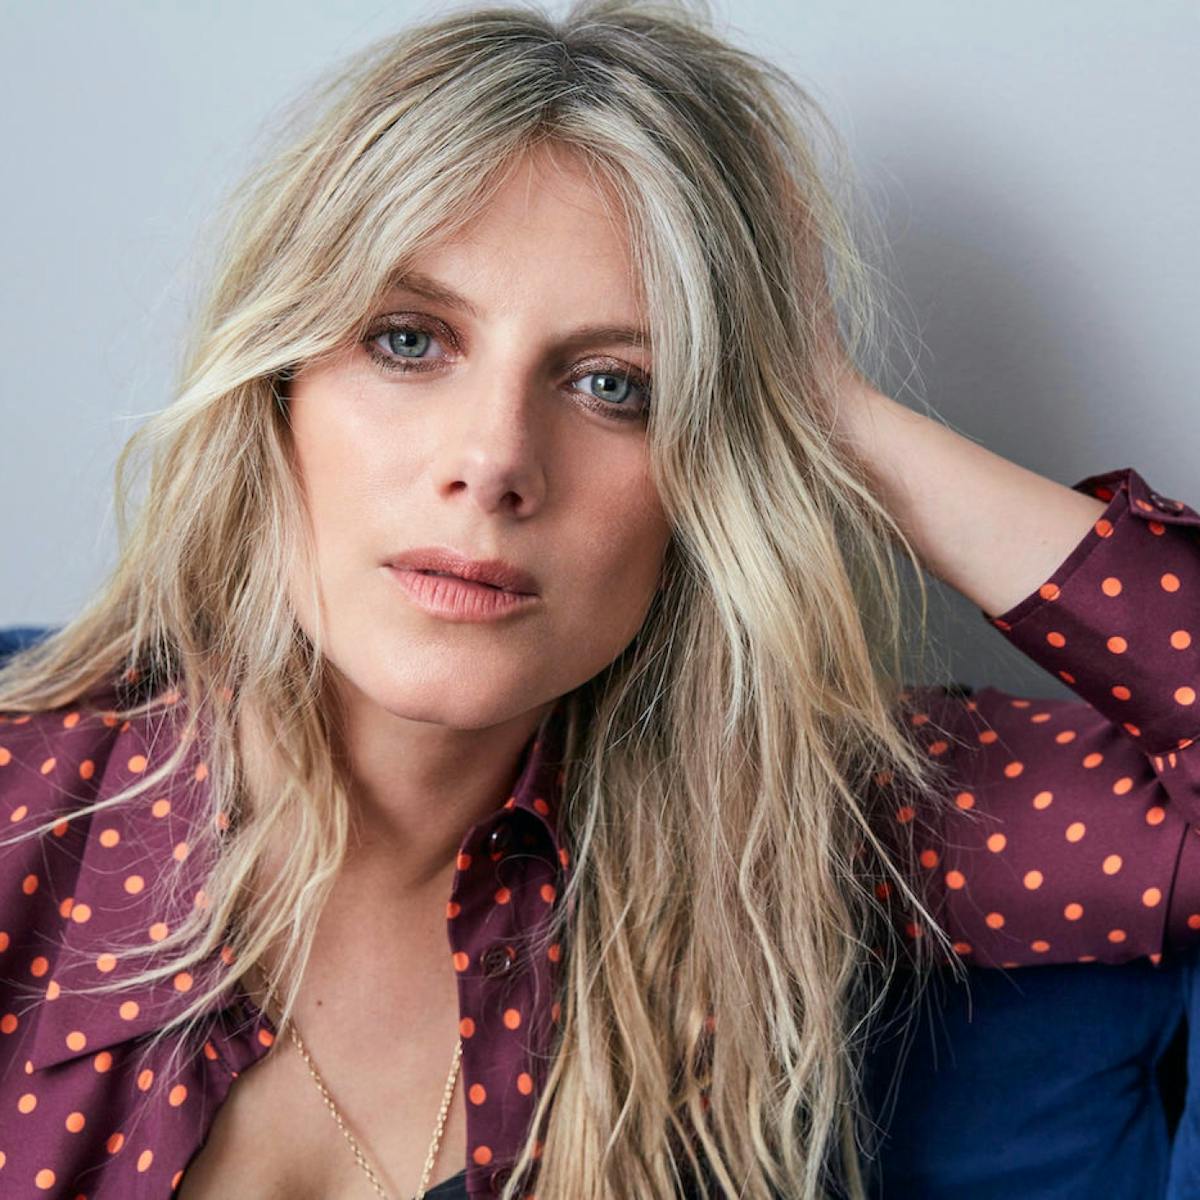 Laurent wears a maroon and orange-polka-dotted blouse, gold jewelry, and sits on a blue couch. Her blond hair is long, and she stares right at the camera.